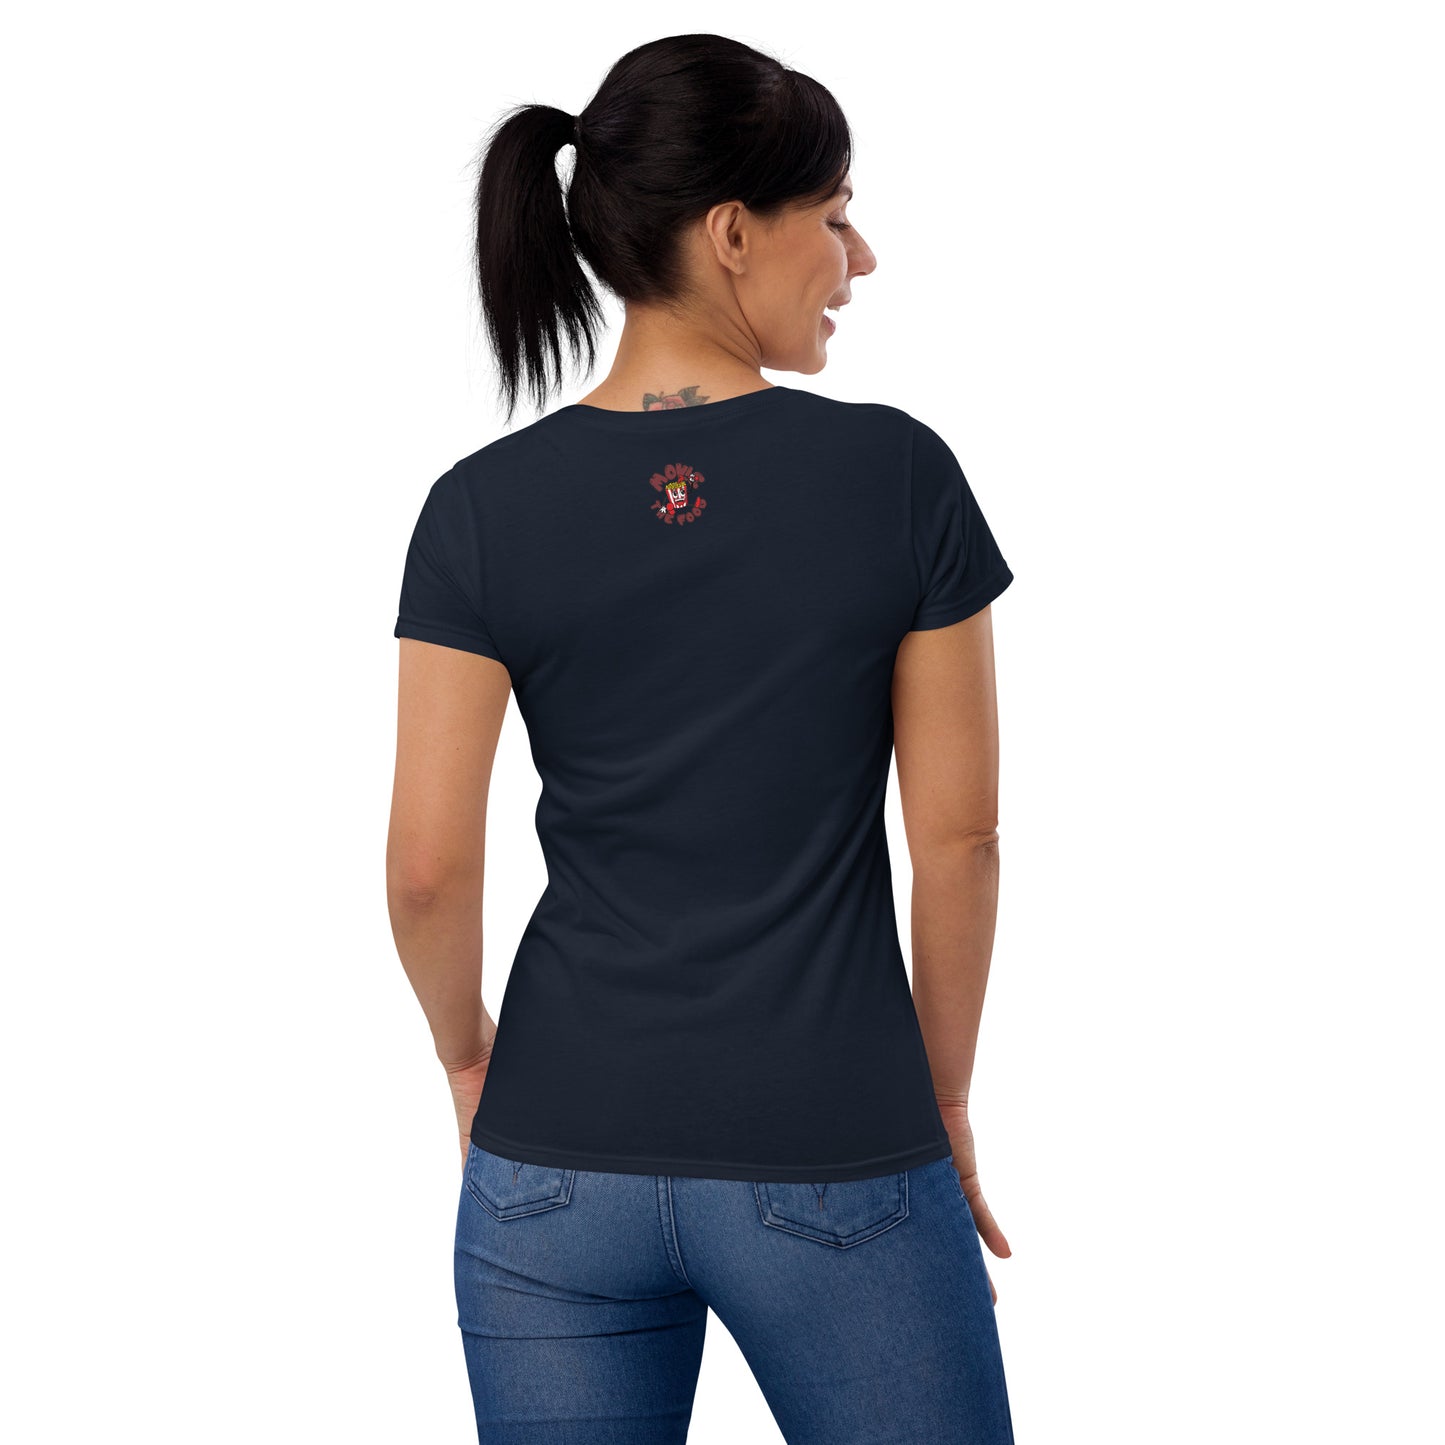 Movie The Food - Mango Unchained Women's T-Shirt - Navy - Model Back